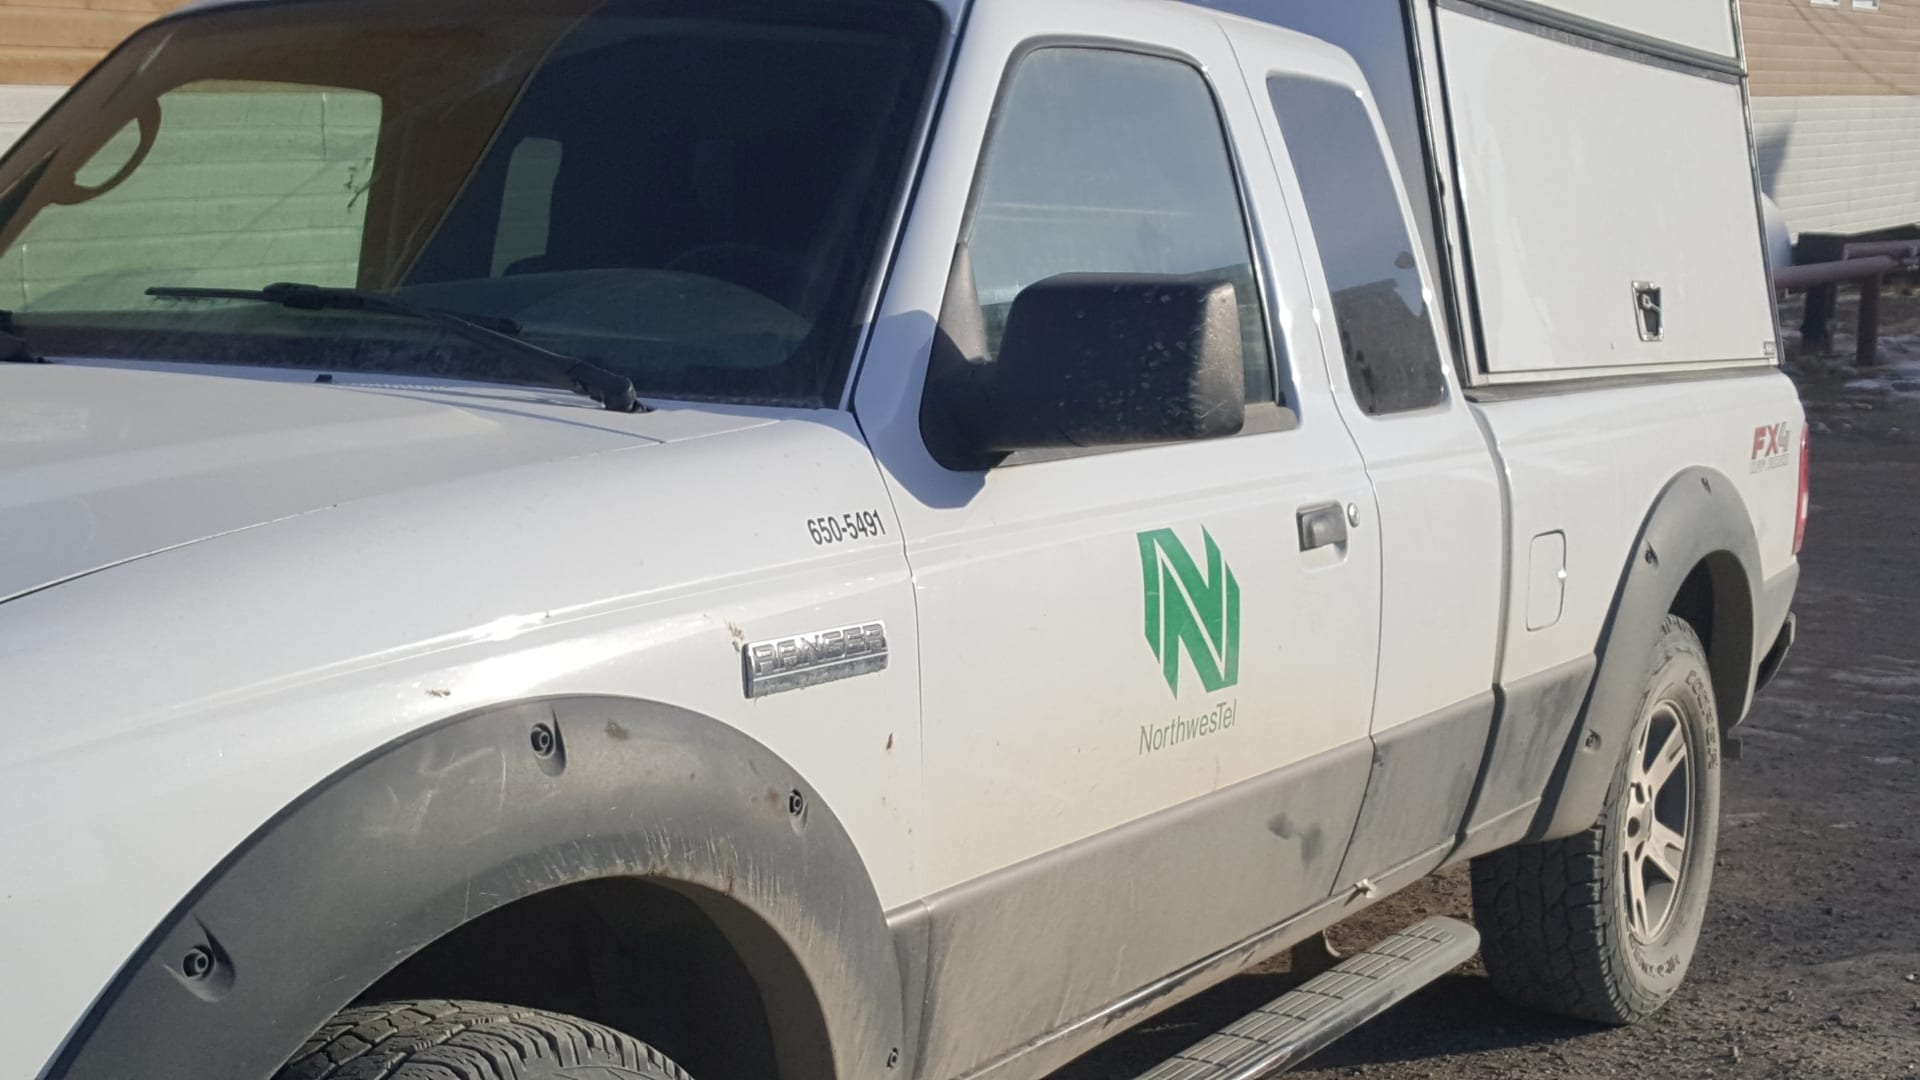 Northwestel customers in Yellowknife and surrounding areas had a 'major' disruption in services on May 8. NNSL file photo